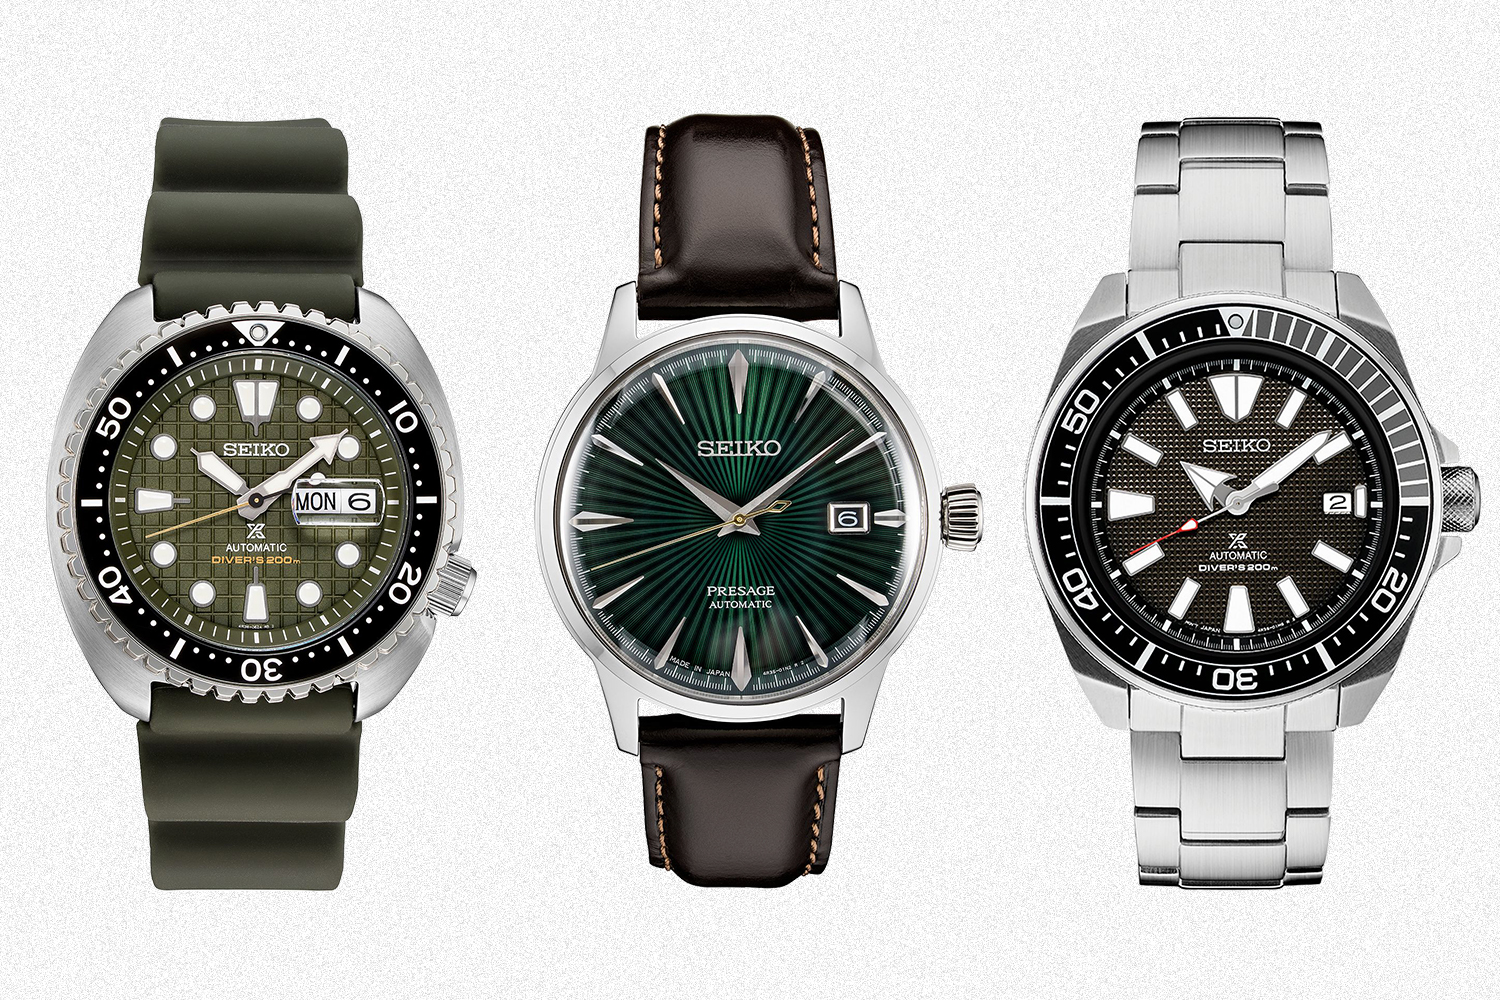 Grab One of a Hundred Seiko Watches 25% Off at Macy's - InsideHook